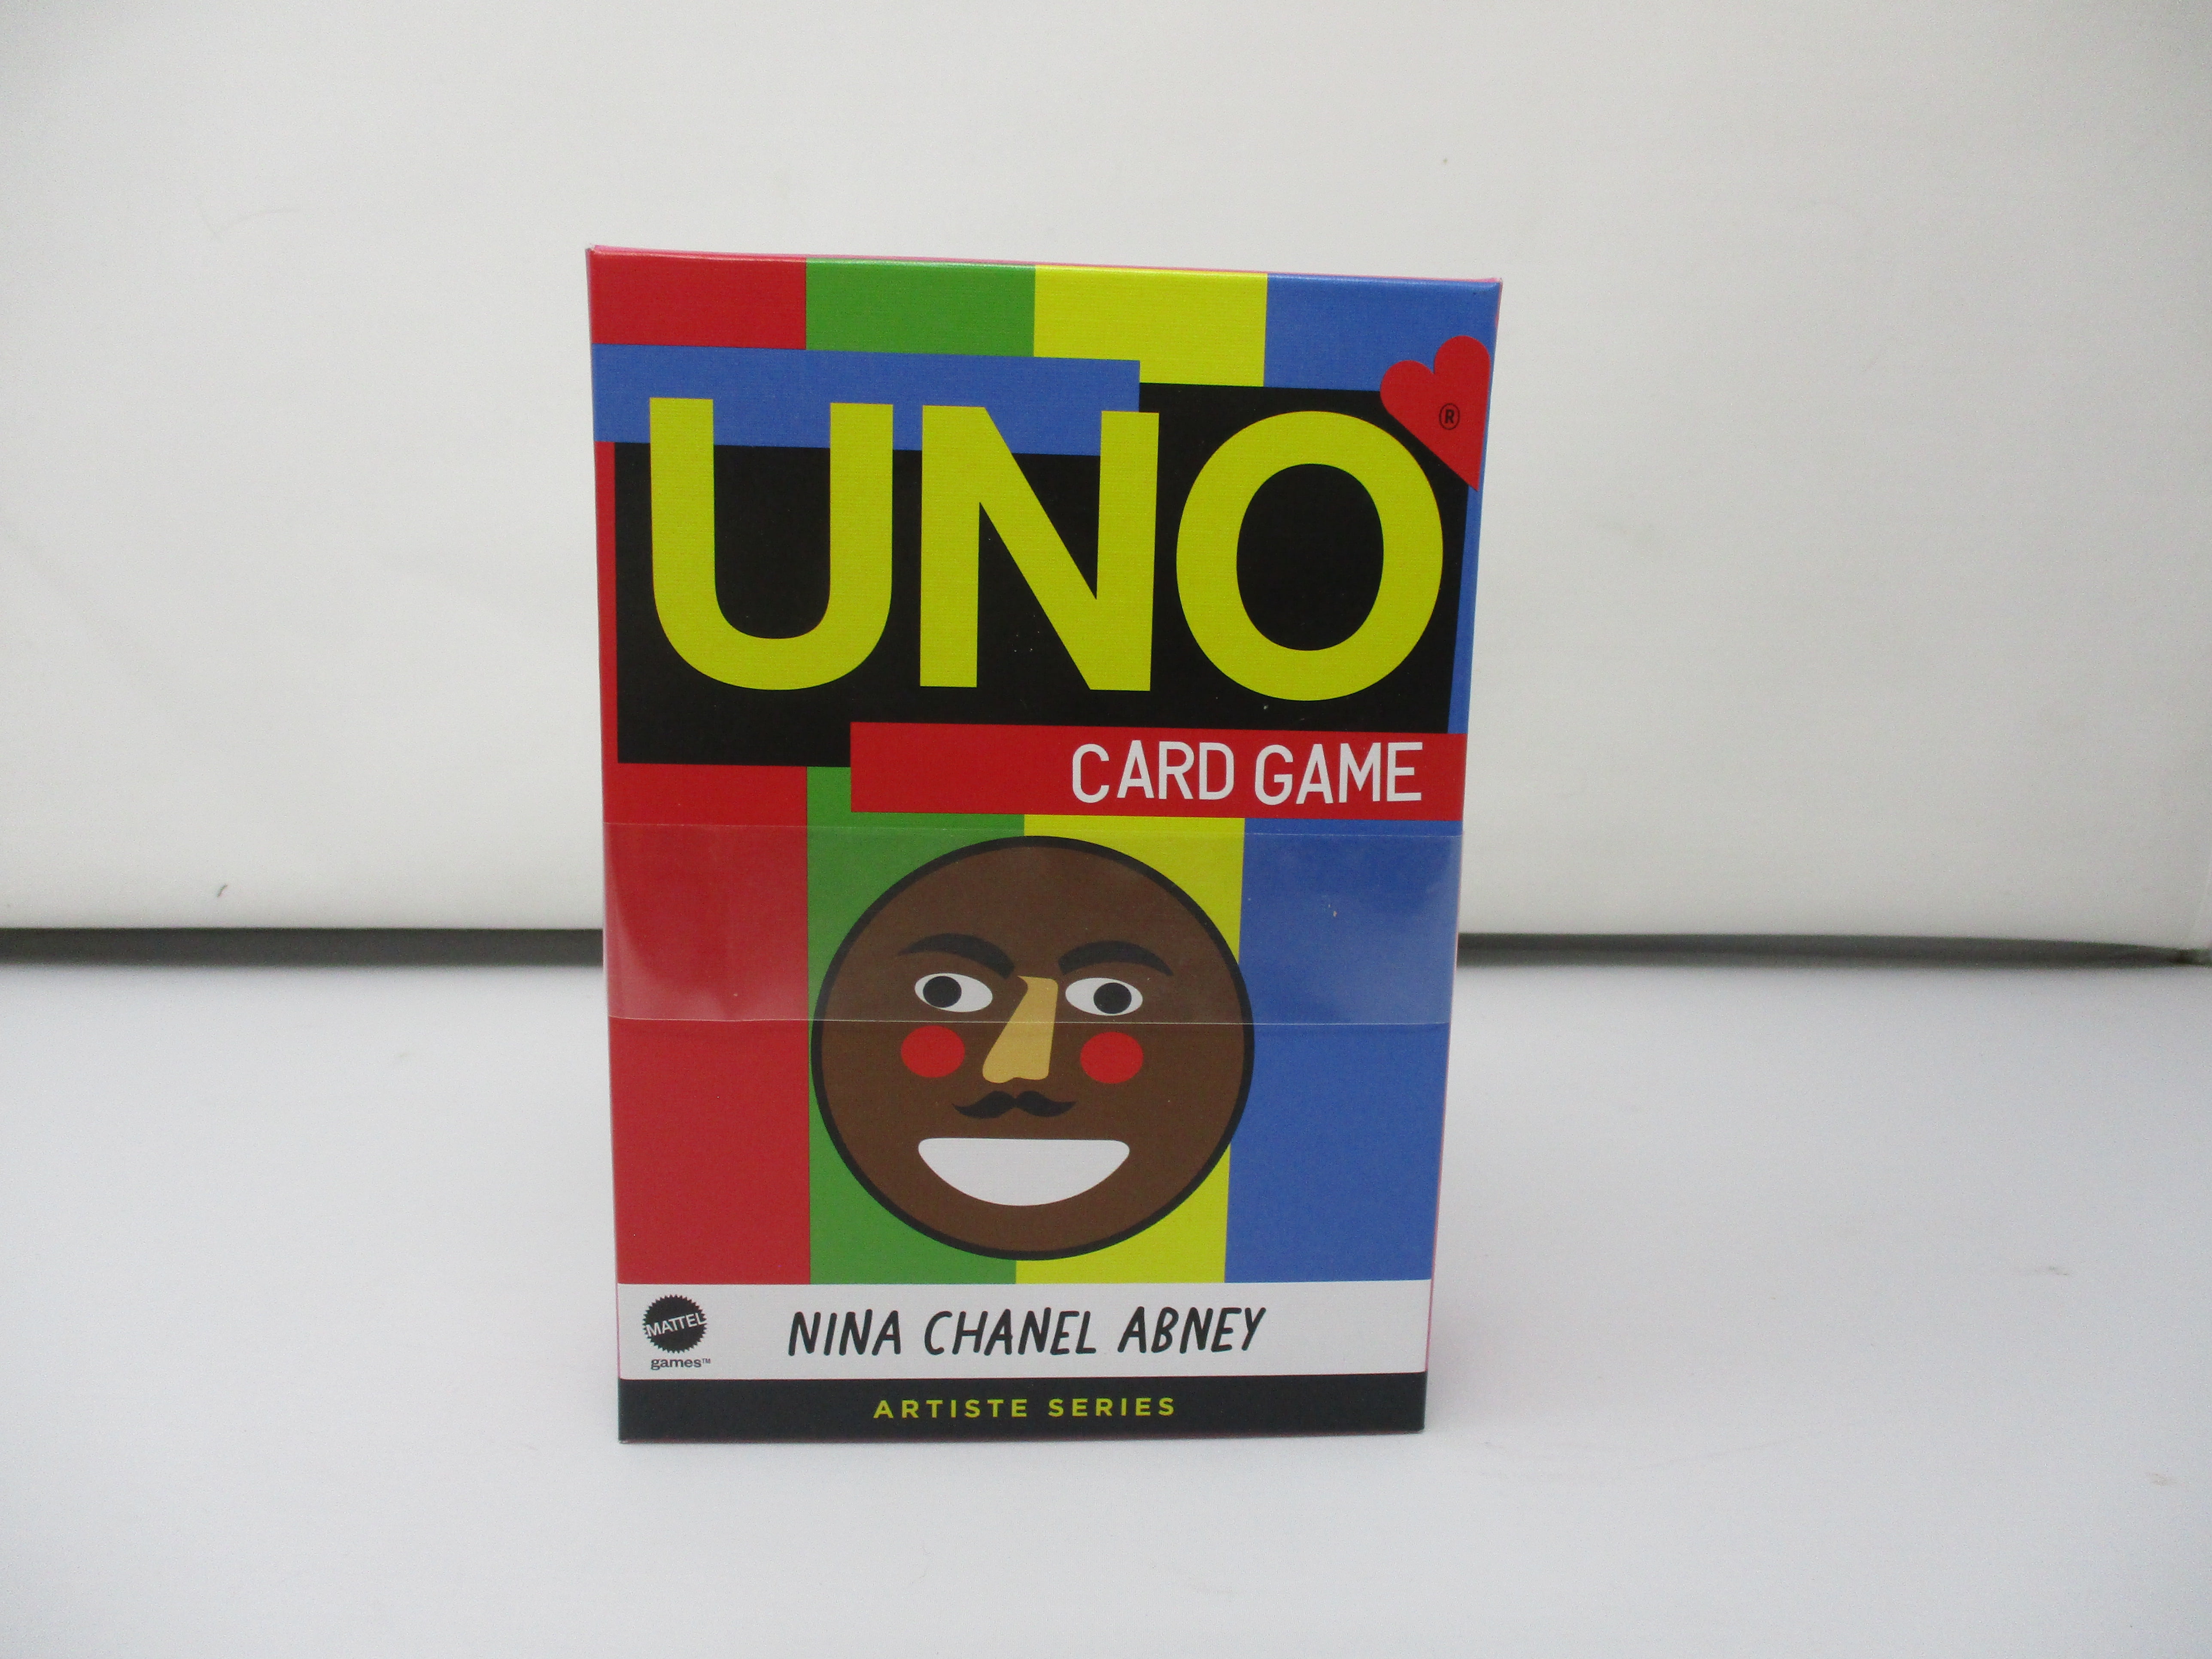 Uno Card Game Artiste Series Nina Chanel Abney 